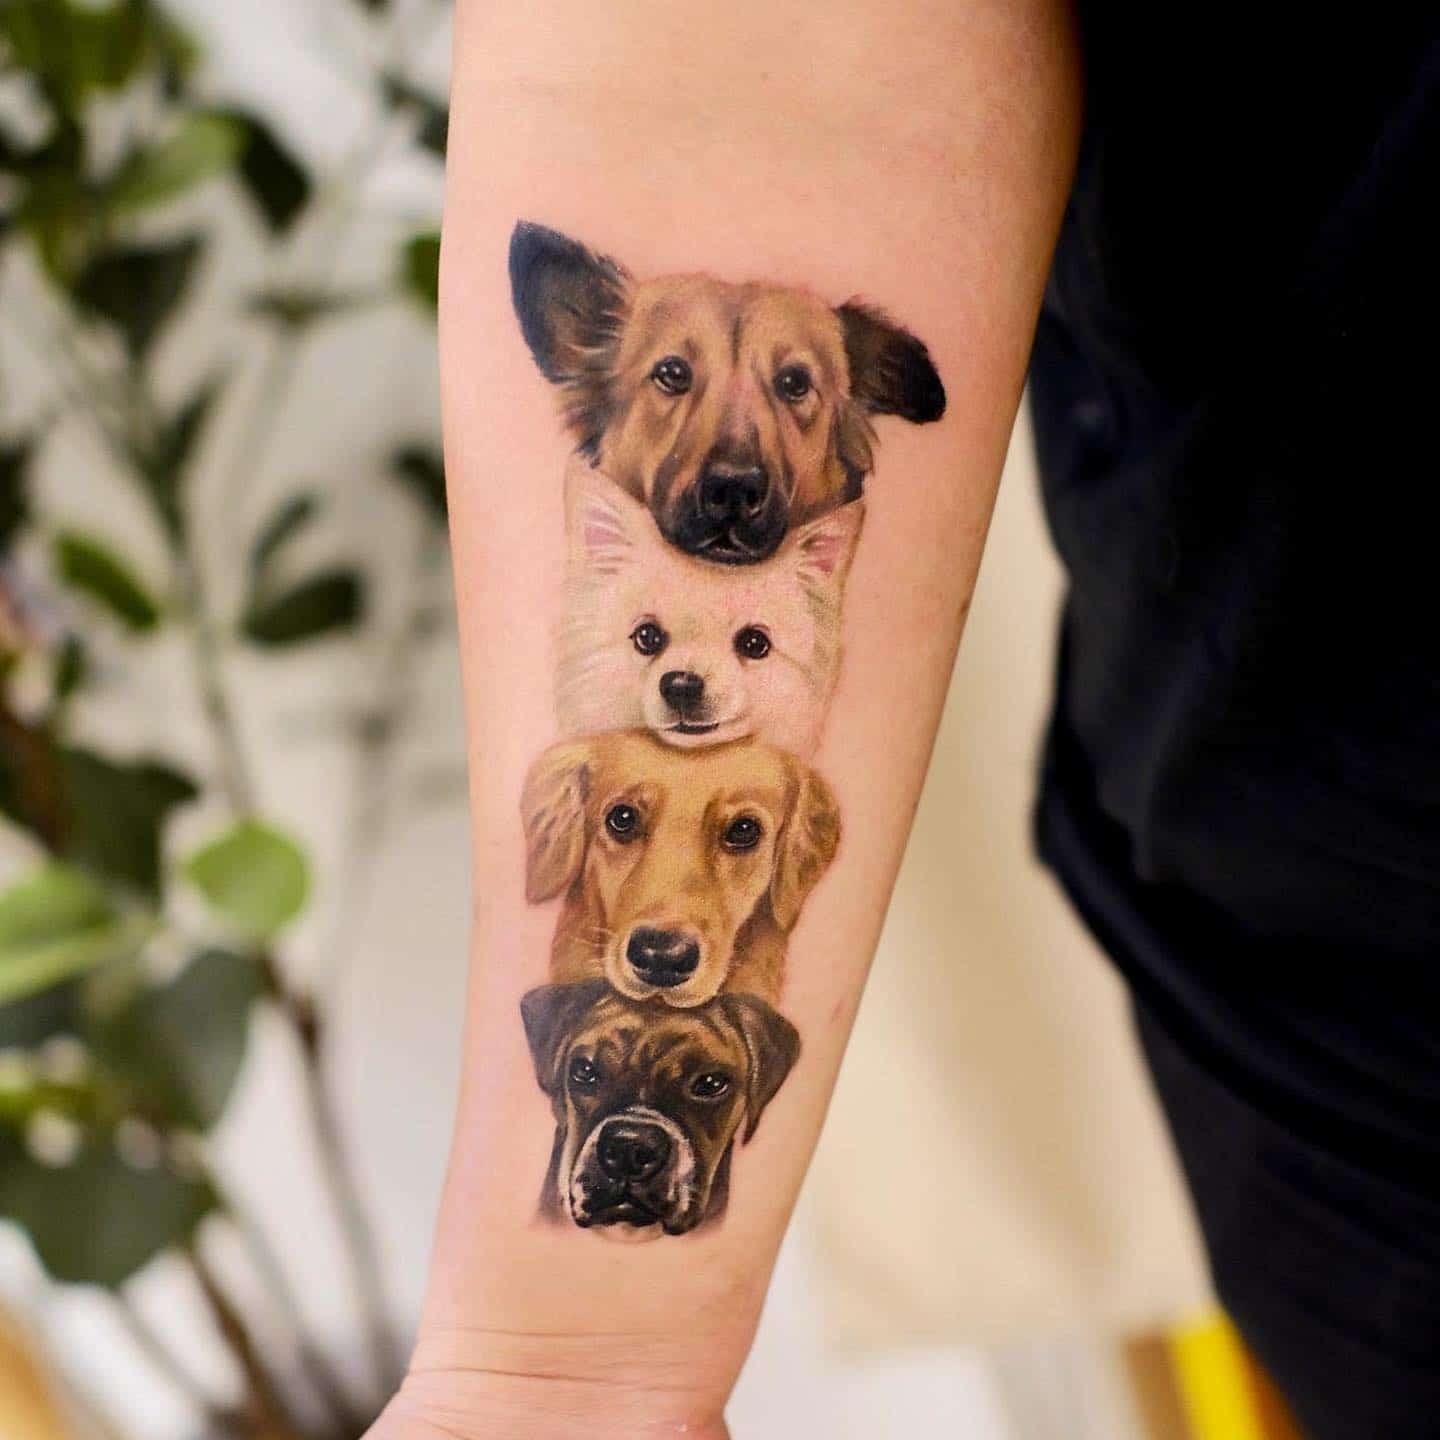 Pet Tattoo Ideas and Inspo, Pet Tattoo Designs - Inside Out